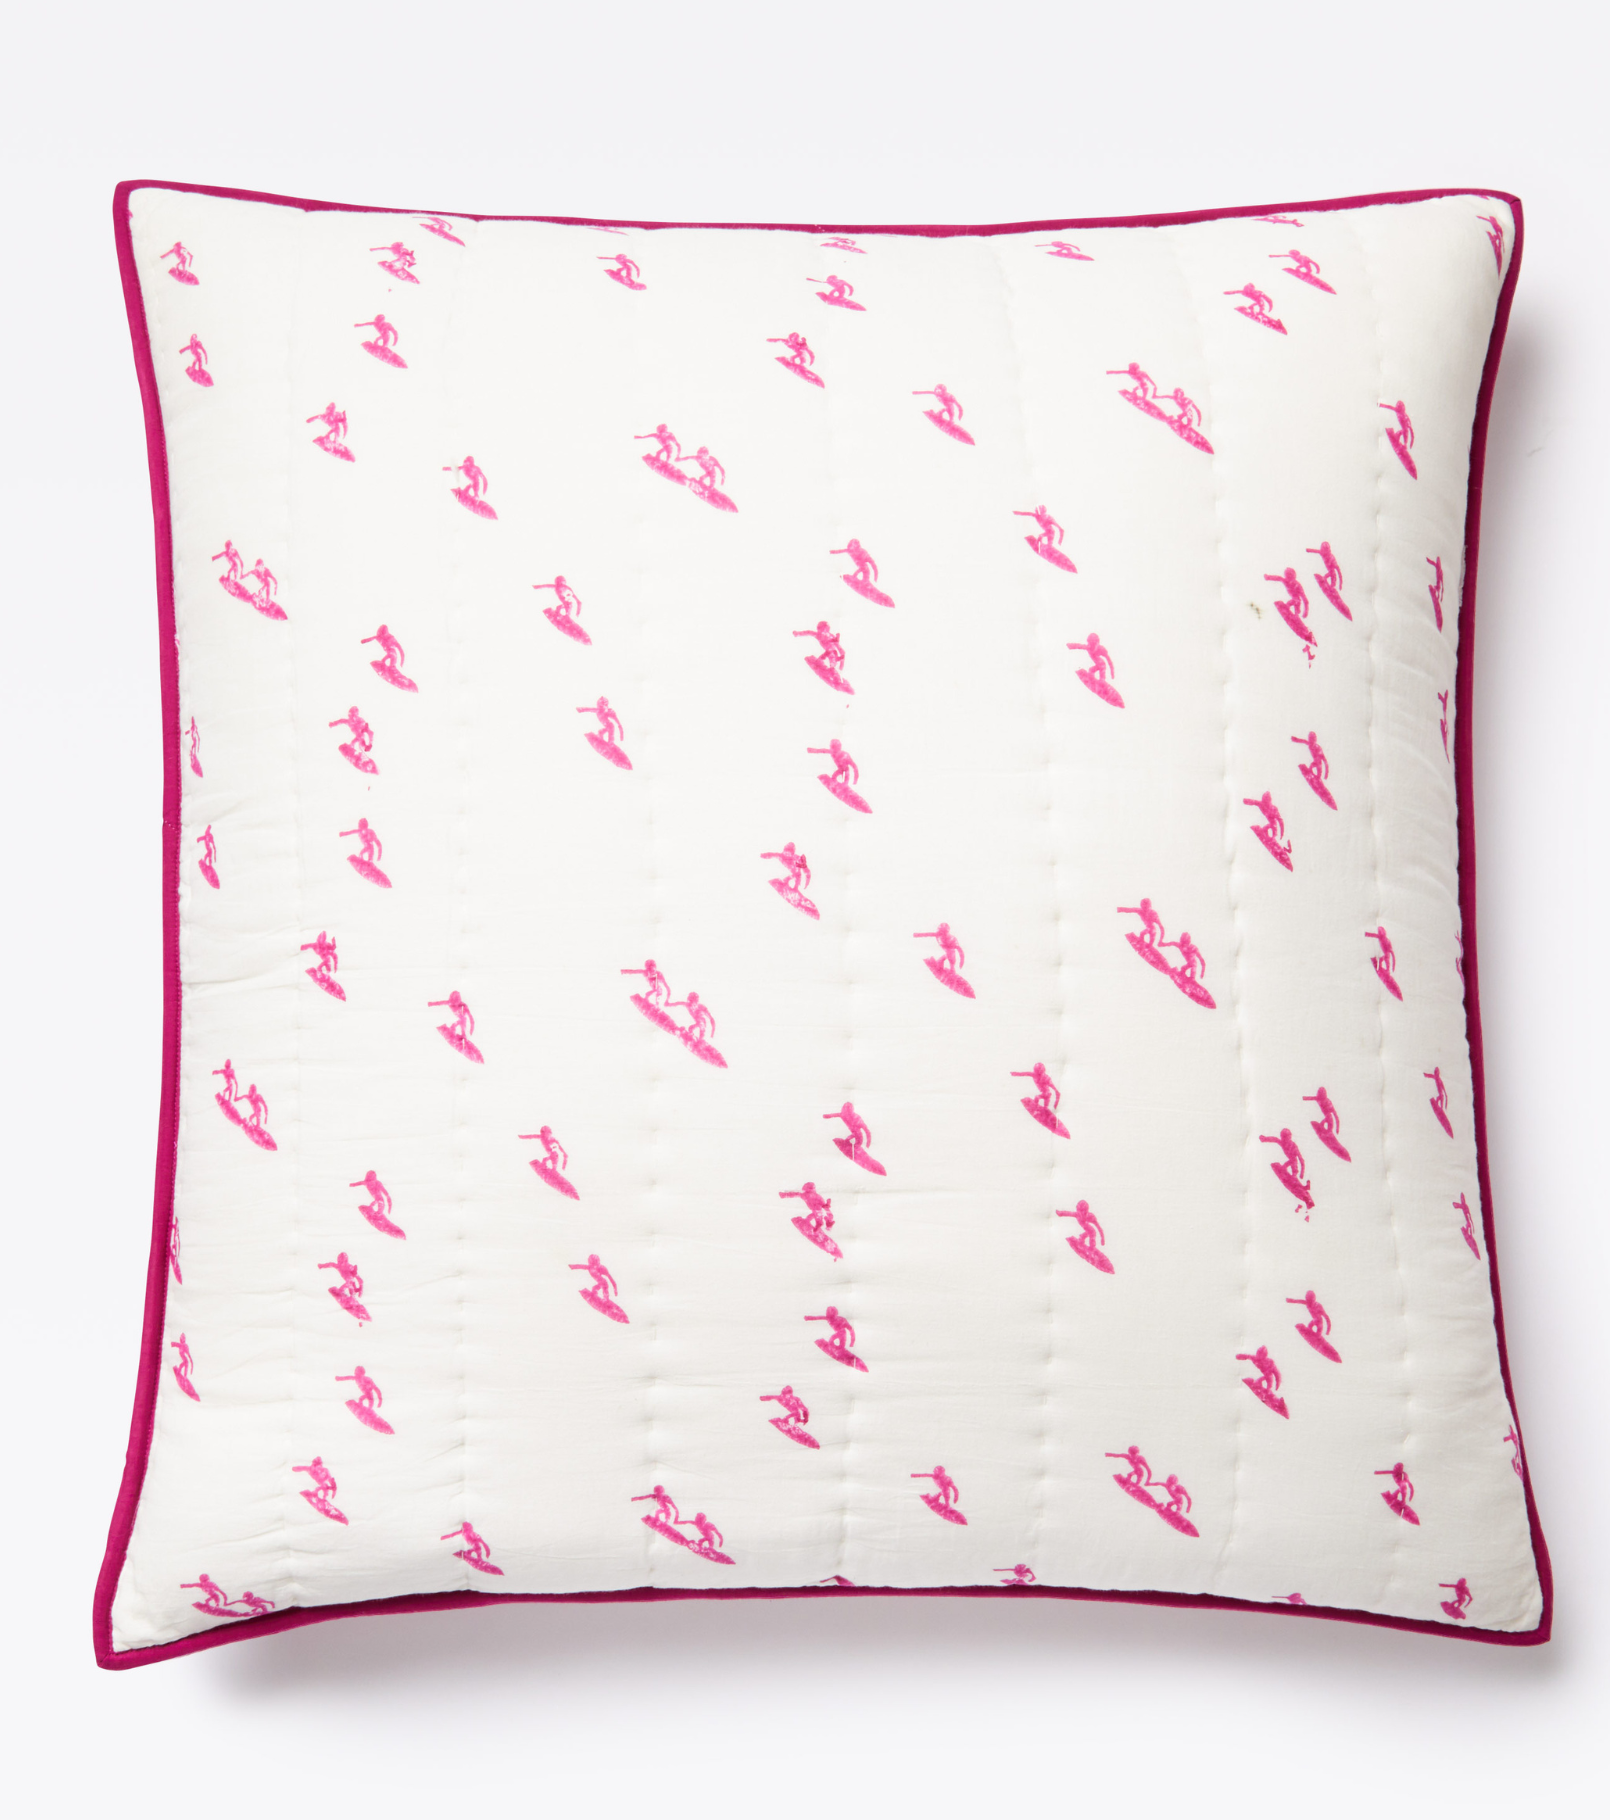 Andrew Mau x Averylily Surfer Blockprint Euro Sham in Orchid Pink.